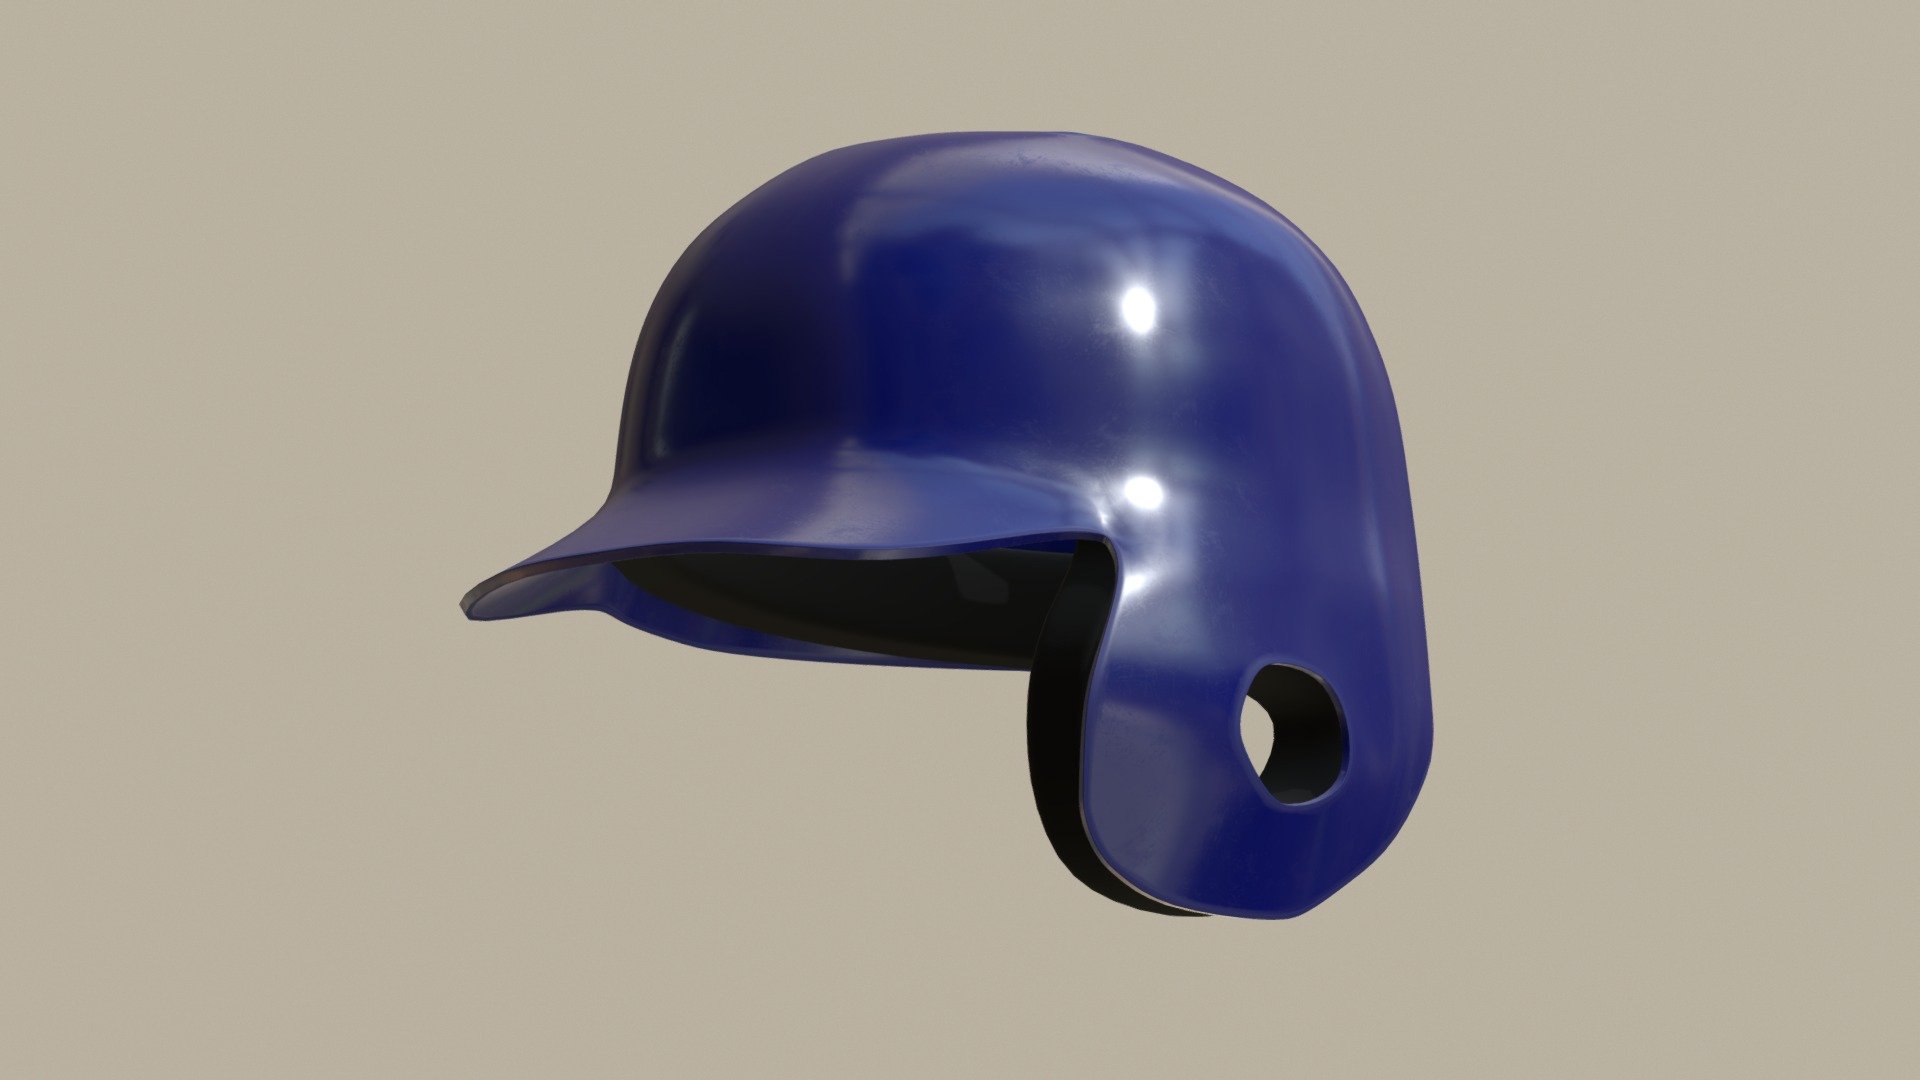 3D Model of Classic Baseball batting helmet with one ear protect. Sport equipment

Zip contains:

1 .max (3dsMax 2016)

1 .mat  (Vray Materials)

1 .blend (low poly with Subsurf.mod, with UV and Materials)

2 .fbx (high poly, smoothed)
   .fbx (low poly, not smoothed)

2 .obj (high poly, smoothed)
   .obj (low poly, not smoothed)

1 .ksp (Keyshot Pack)

1 .spp (Substance Painter)

High resolution textures(4096x4096 (.tiff 16bit)): Base Color, Ambient Occlusion, Height map, Normal map, Metallic, Roughness

Vray Textures Pack(.tiff 16bit)

Keyshot Textures Pack(.tiff 16bit)

PBR Textures Pack(.tiff 16bit)

The author hopes to your creativity.

If you have questions or suggestions, please contact me

P.S. This model was created in software &lsquo;Blender 3D' with GNU General Public License (GPL, or free software) - Baseball batting helmet with one ear protect - 3D model by Vitamin (@btrseller) 3d model